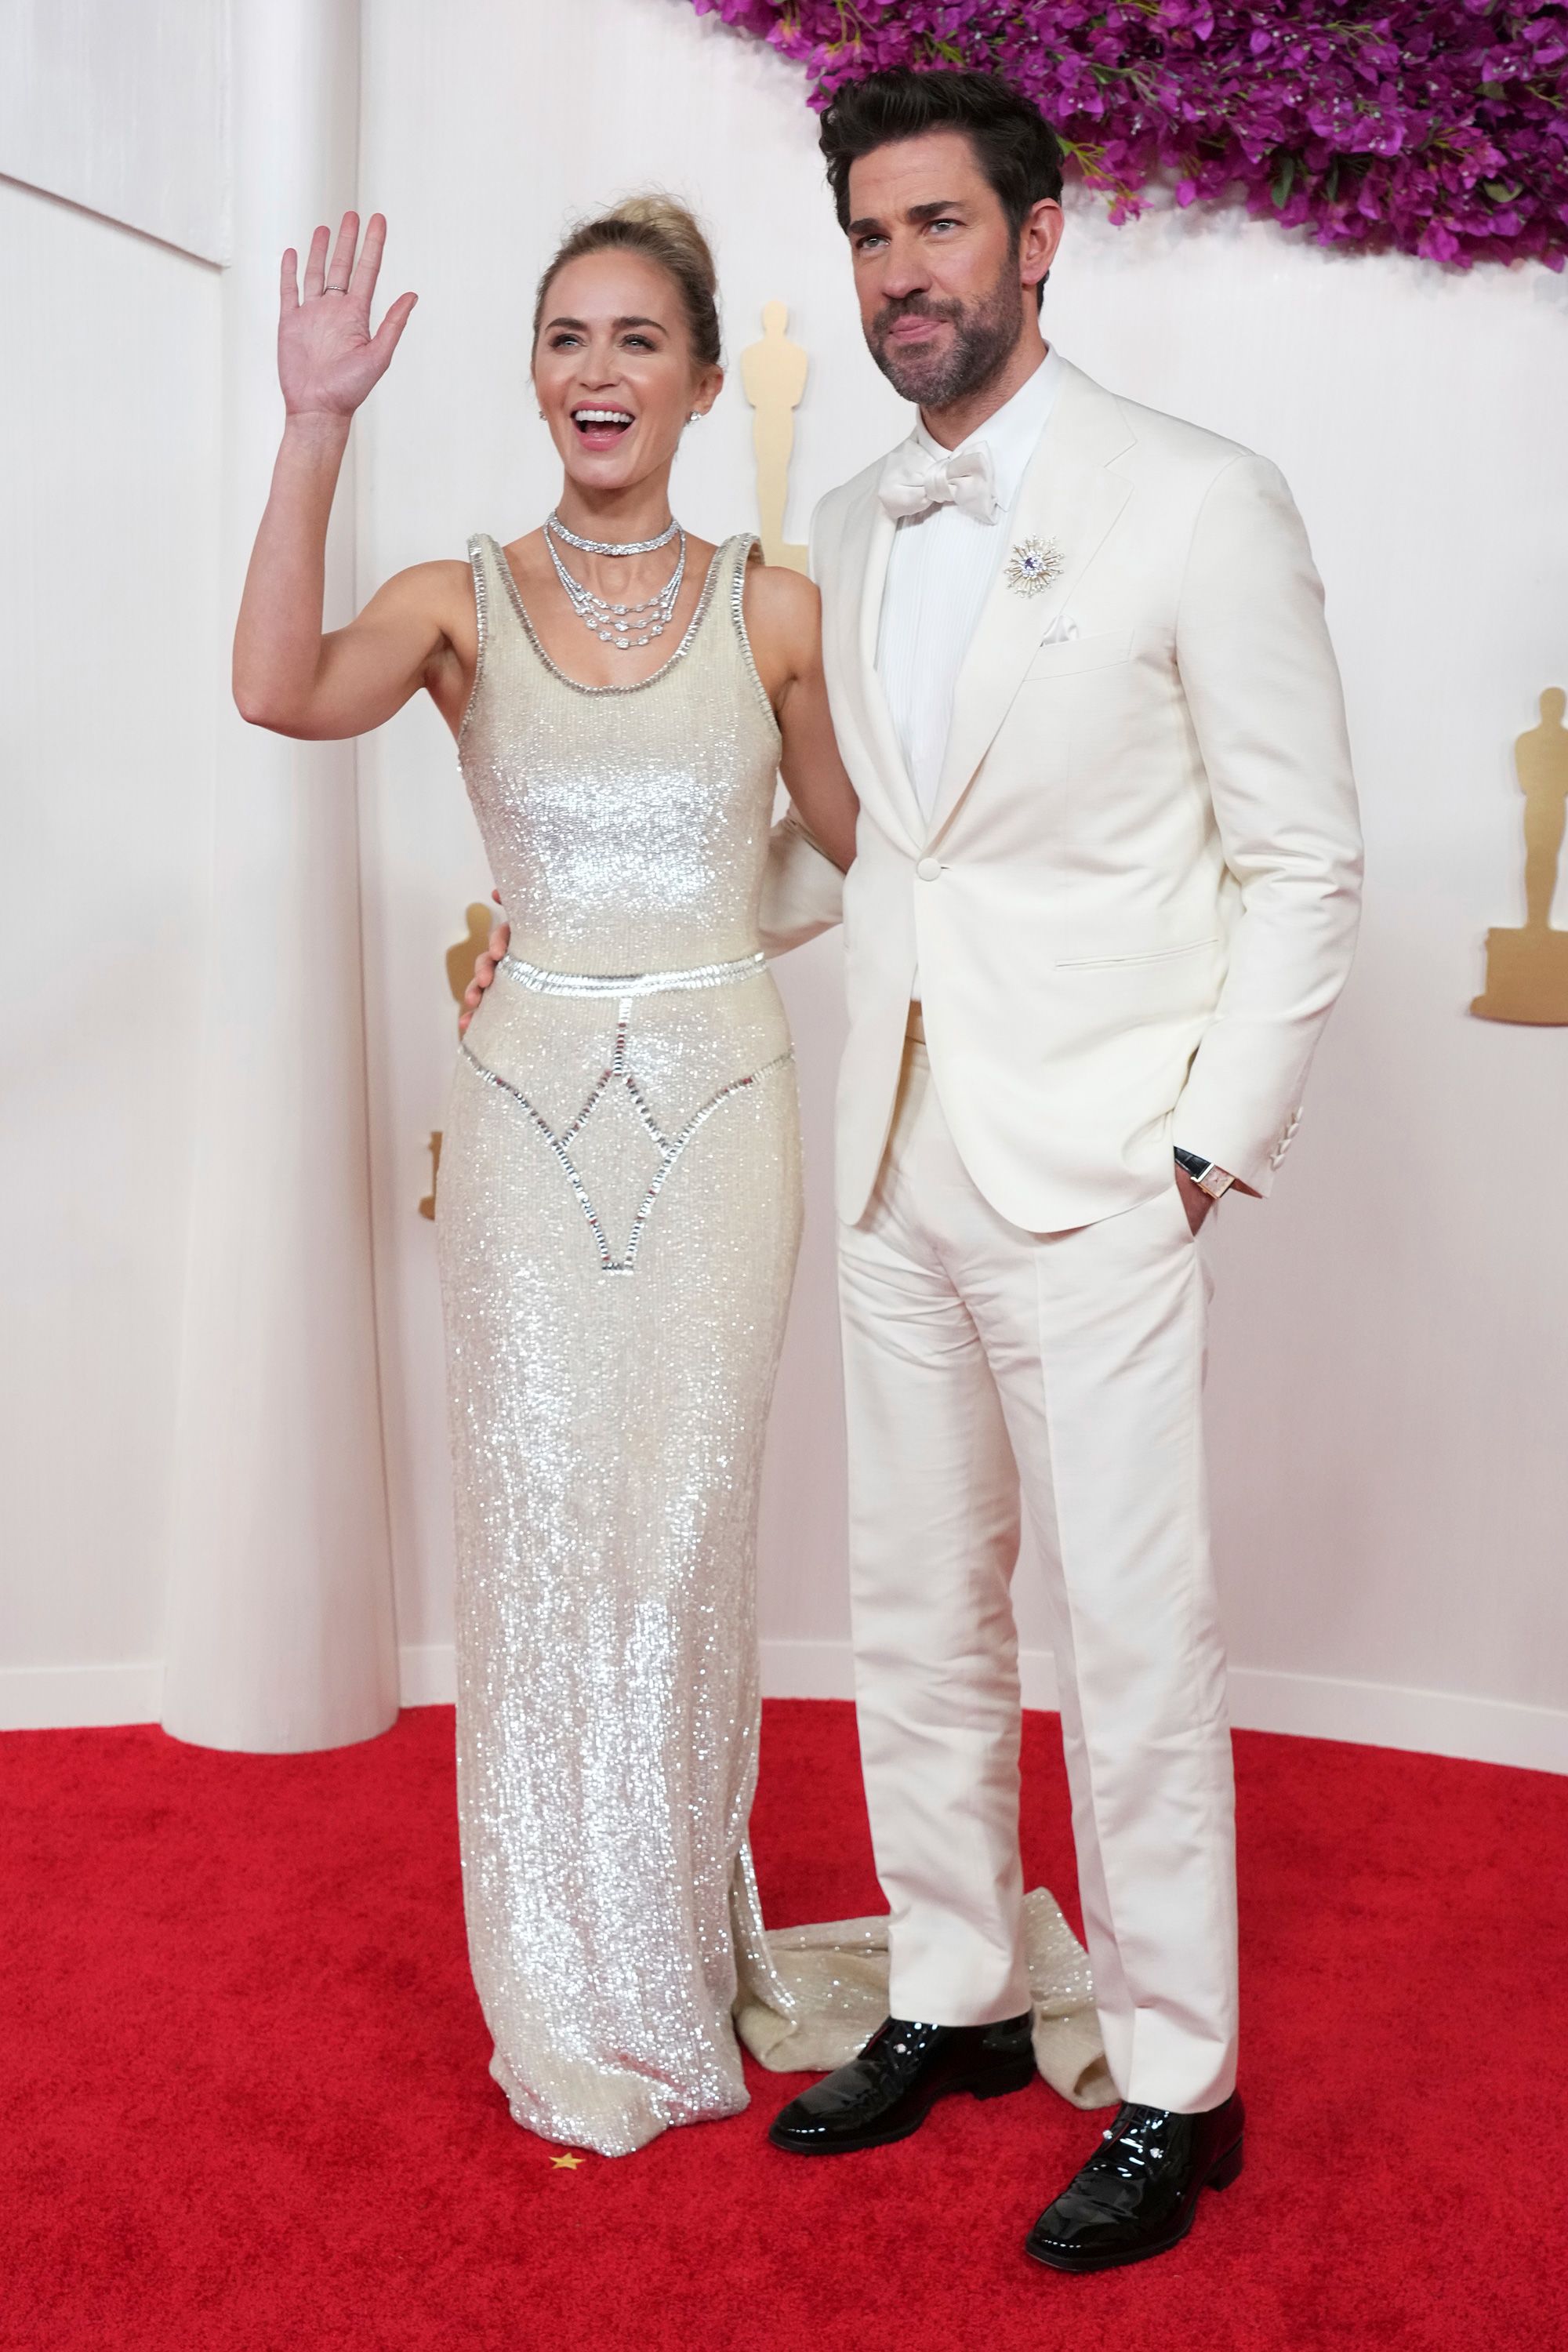 Emily Blunt wore a striking Schiaparelli dress with floating straps.  She was photographed with her husband John Krasinski in an off-white tuxedo.